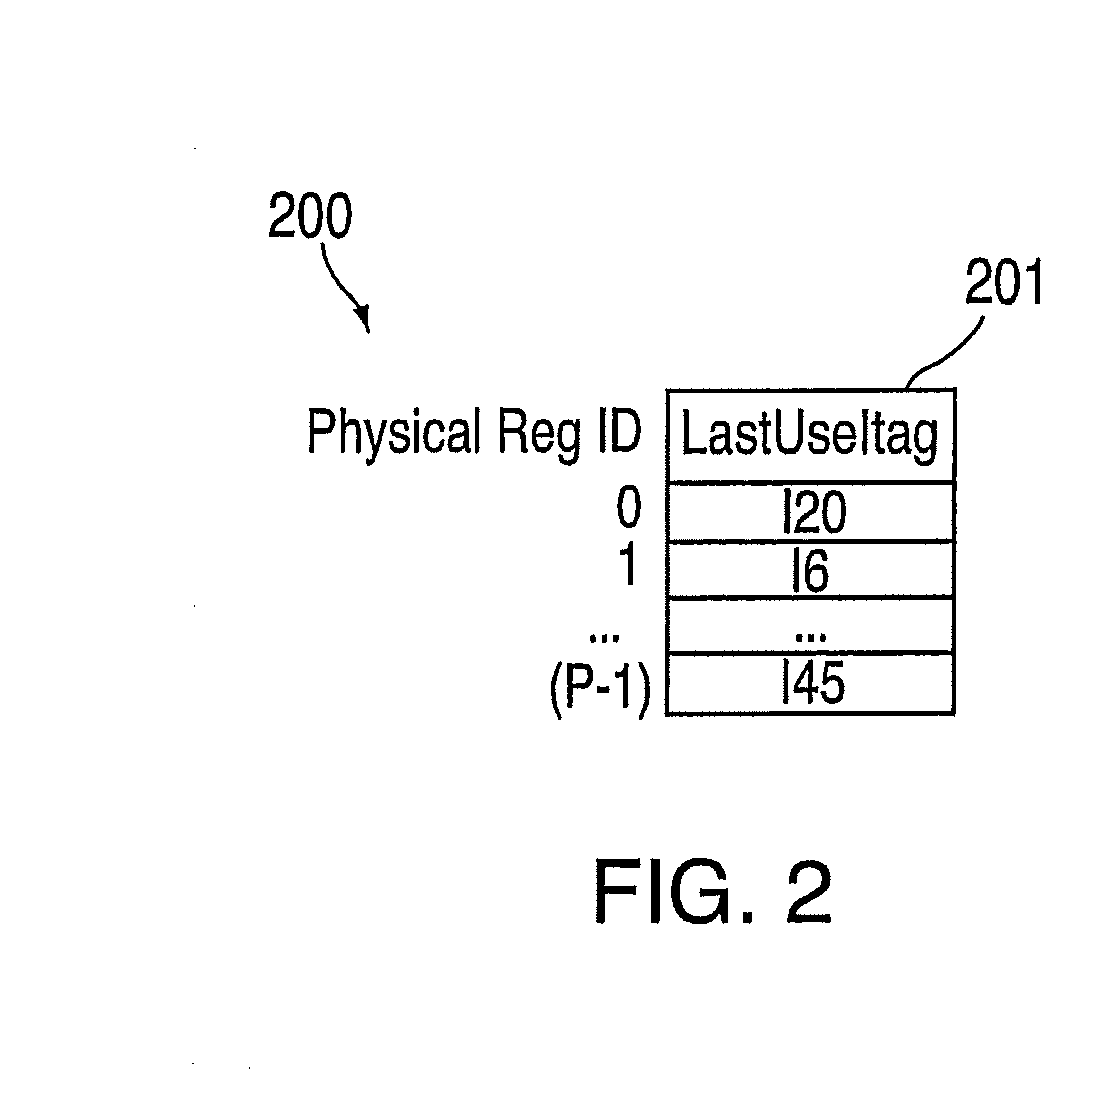 Method And Apparatus For Register Renaming Using Multiple Physical Register Files And Avoiding Associative Search